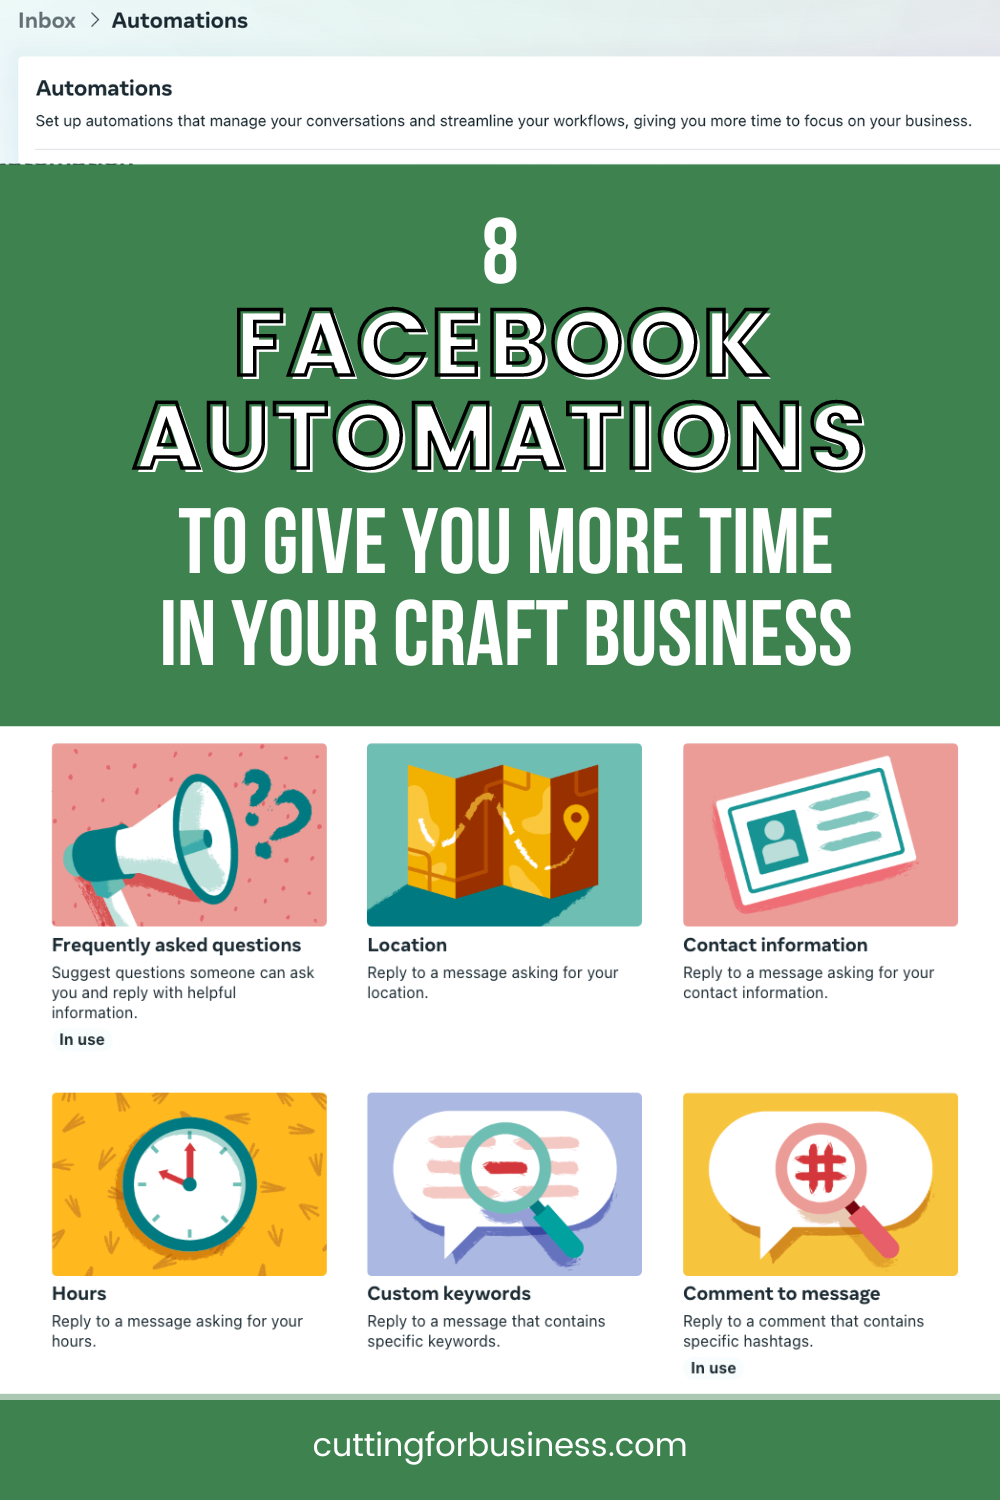 8 Facebook Automations to Give You More Time in Your Craft Business - cuttingforbusiness.com